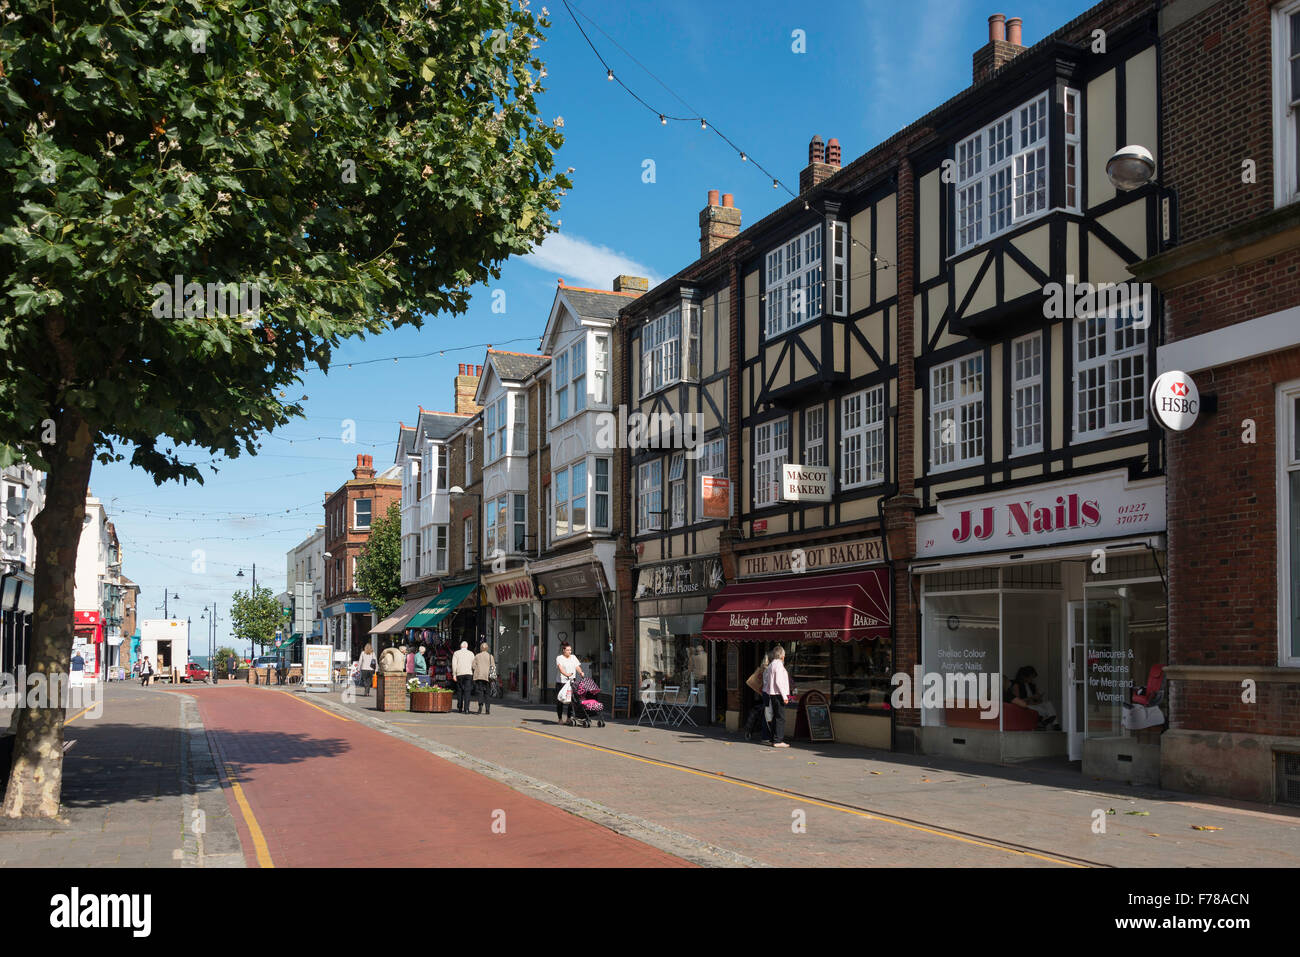 William Street, Herne Bay, Kent, Angleterre, Royaume-Uni Banque D'Images